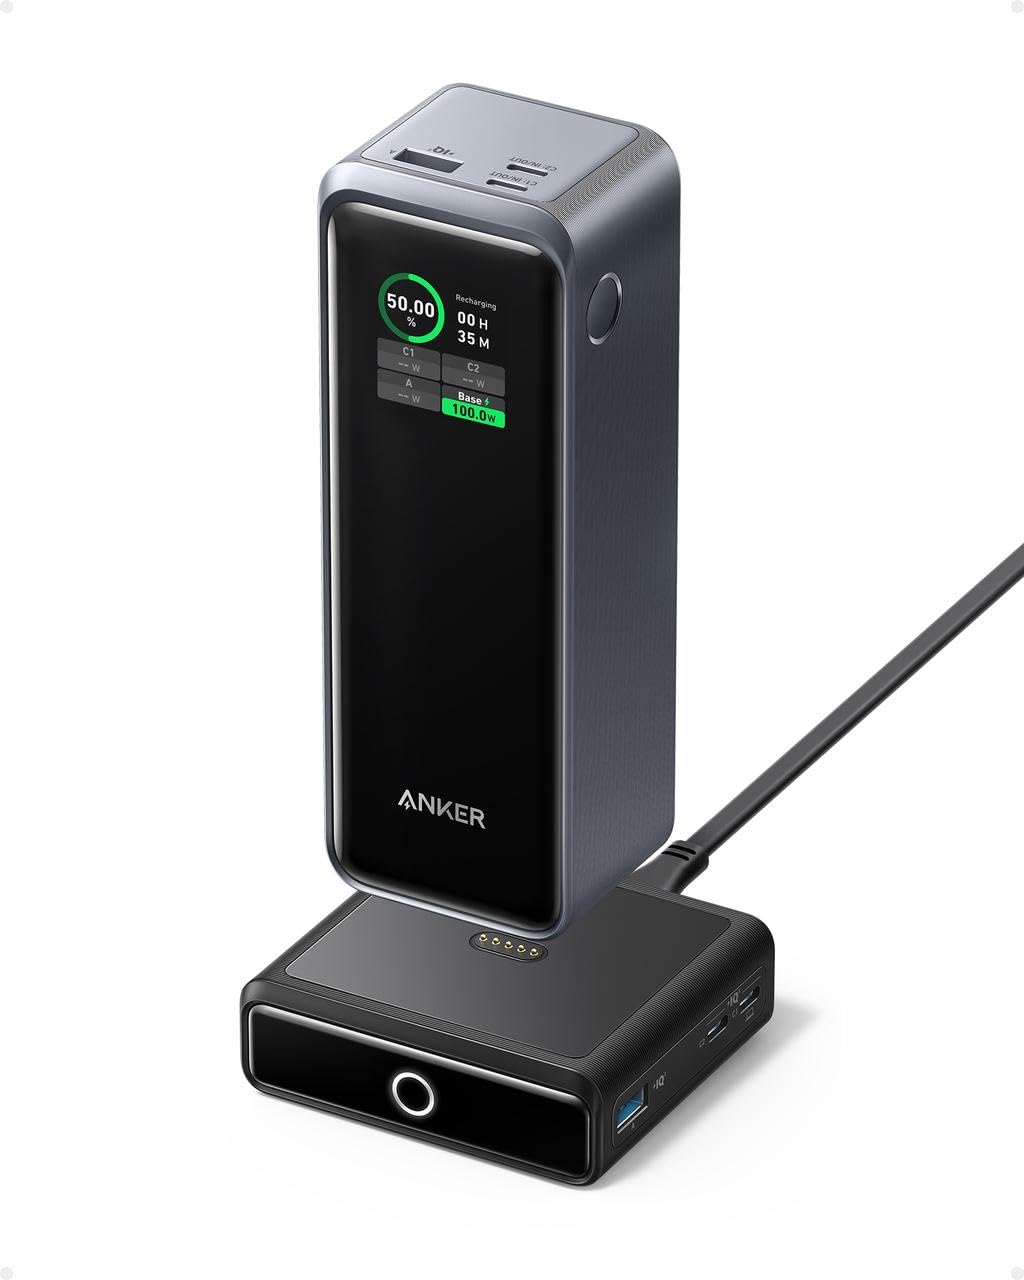 Anker Prime 27650mAh Power Bank (250W) with 100W Charging Base (Black) $164.49 + Free Shipping $164.99